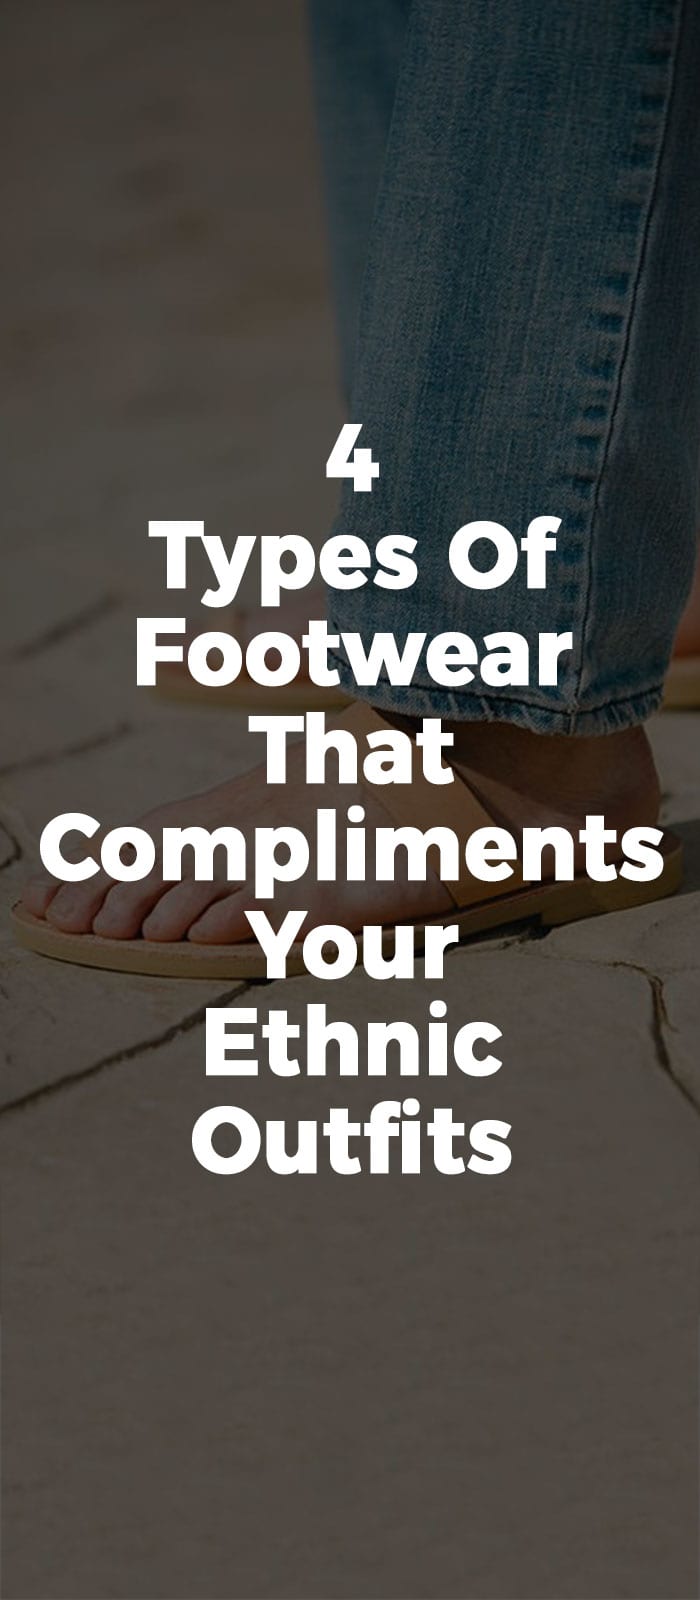 4 Types Of Footwear That Compliments Your Ethnic Outfits